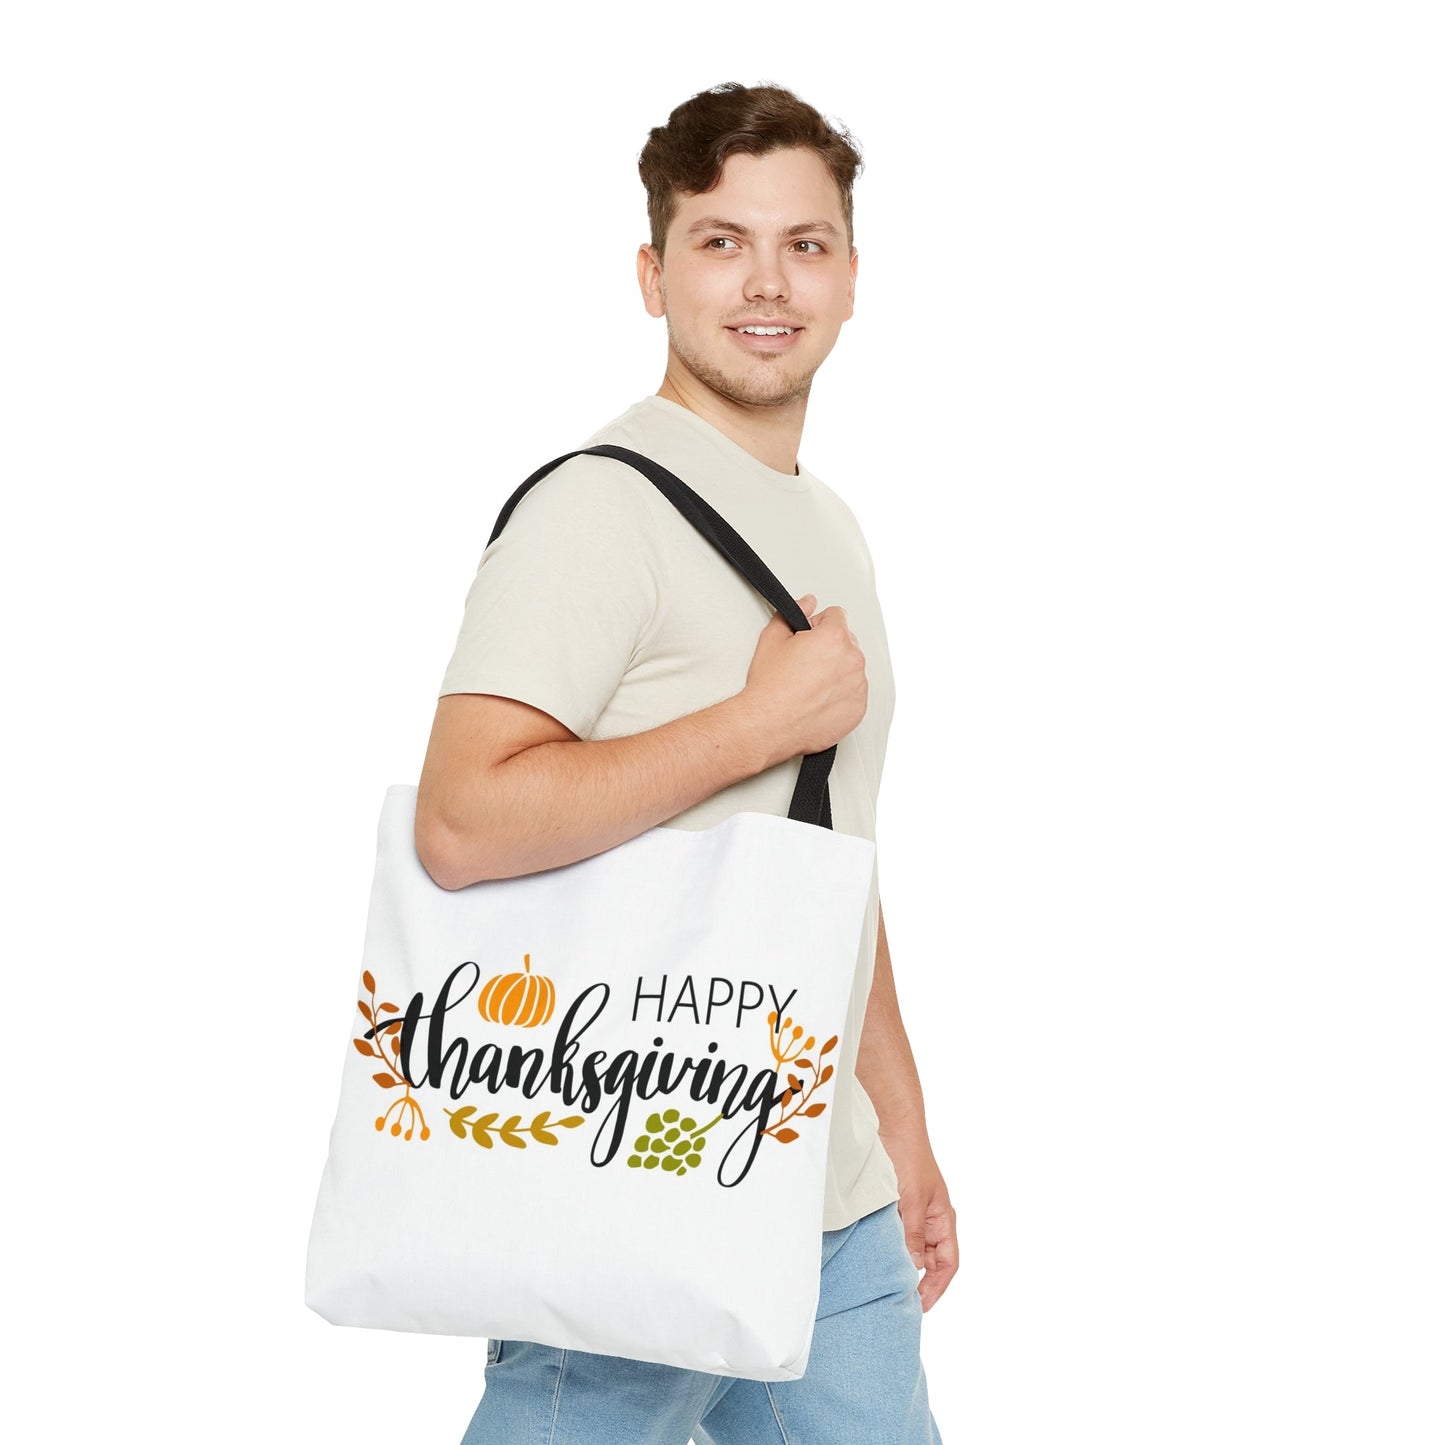 Bags - Happy Thanksgiving Tote Bag